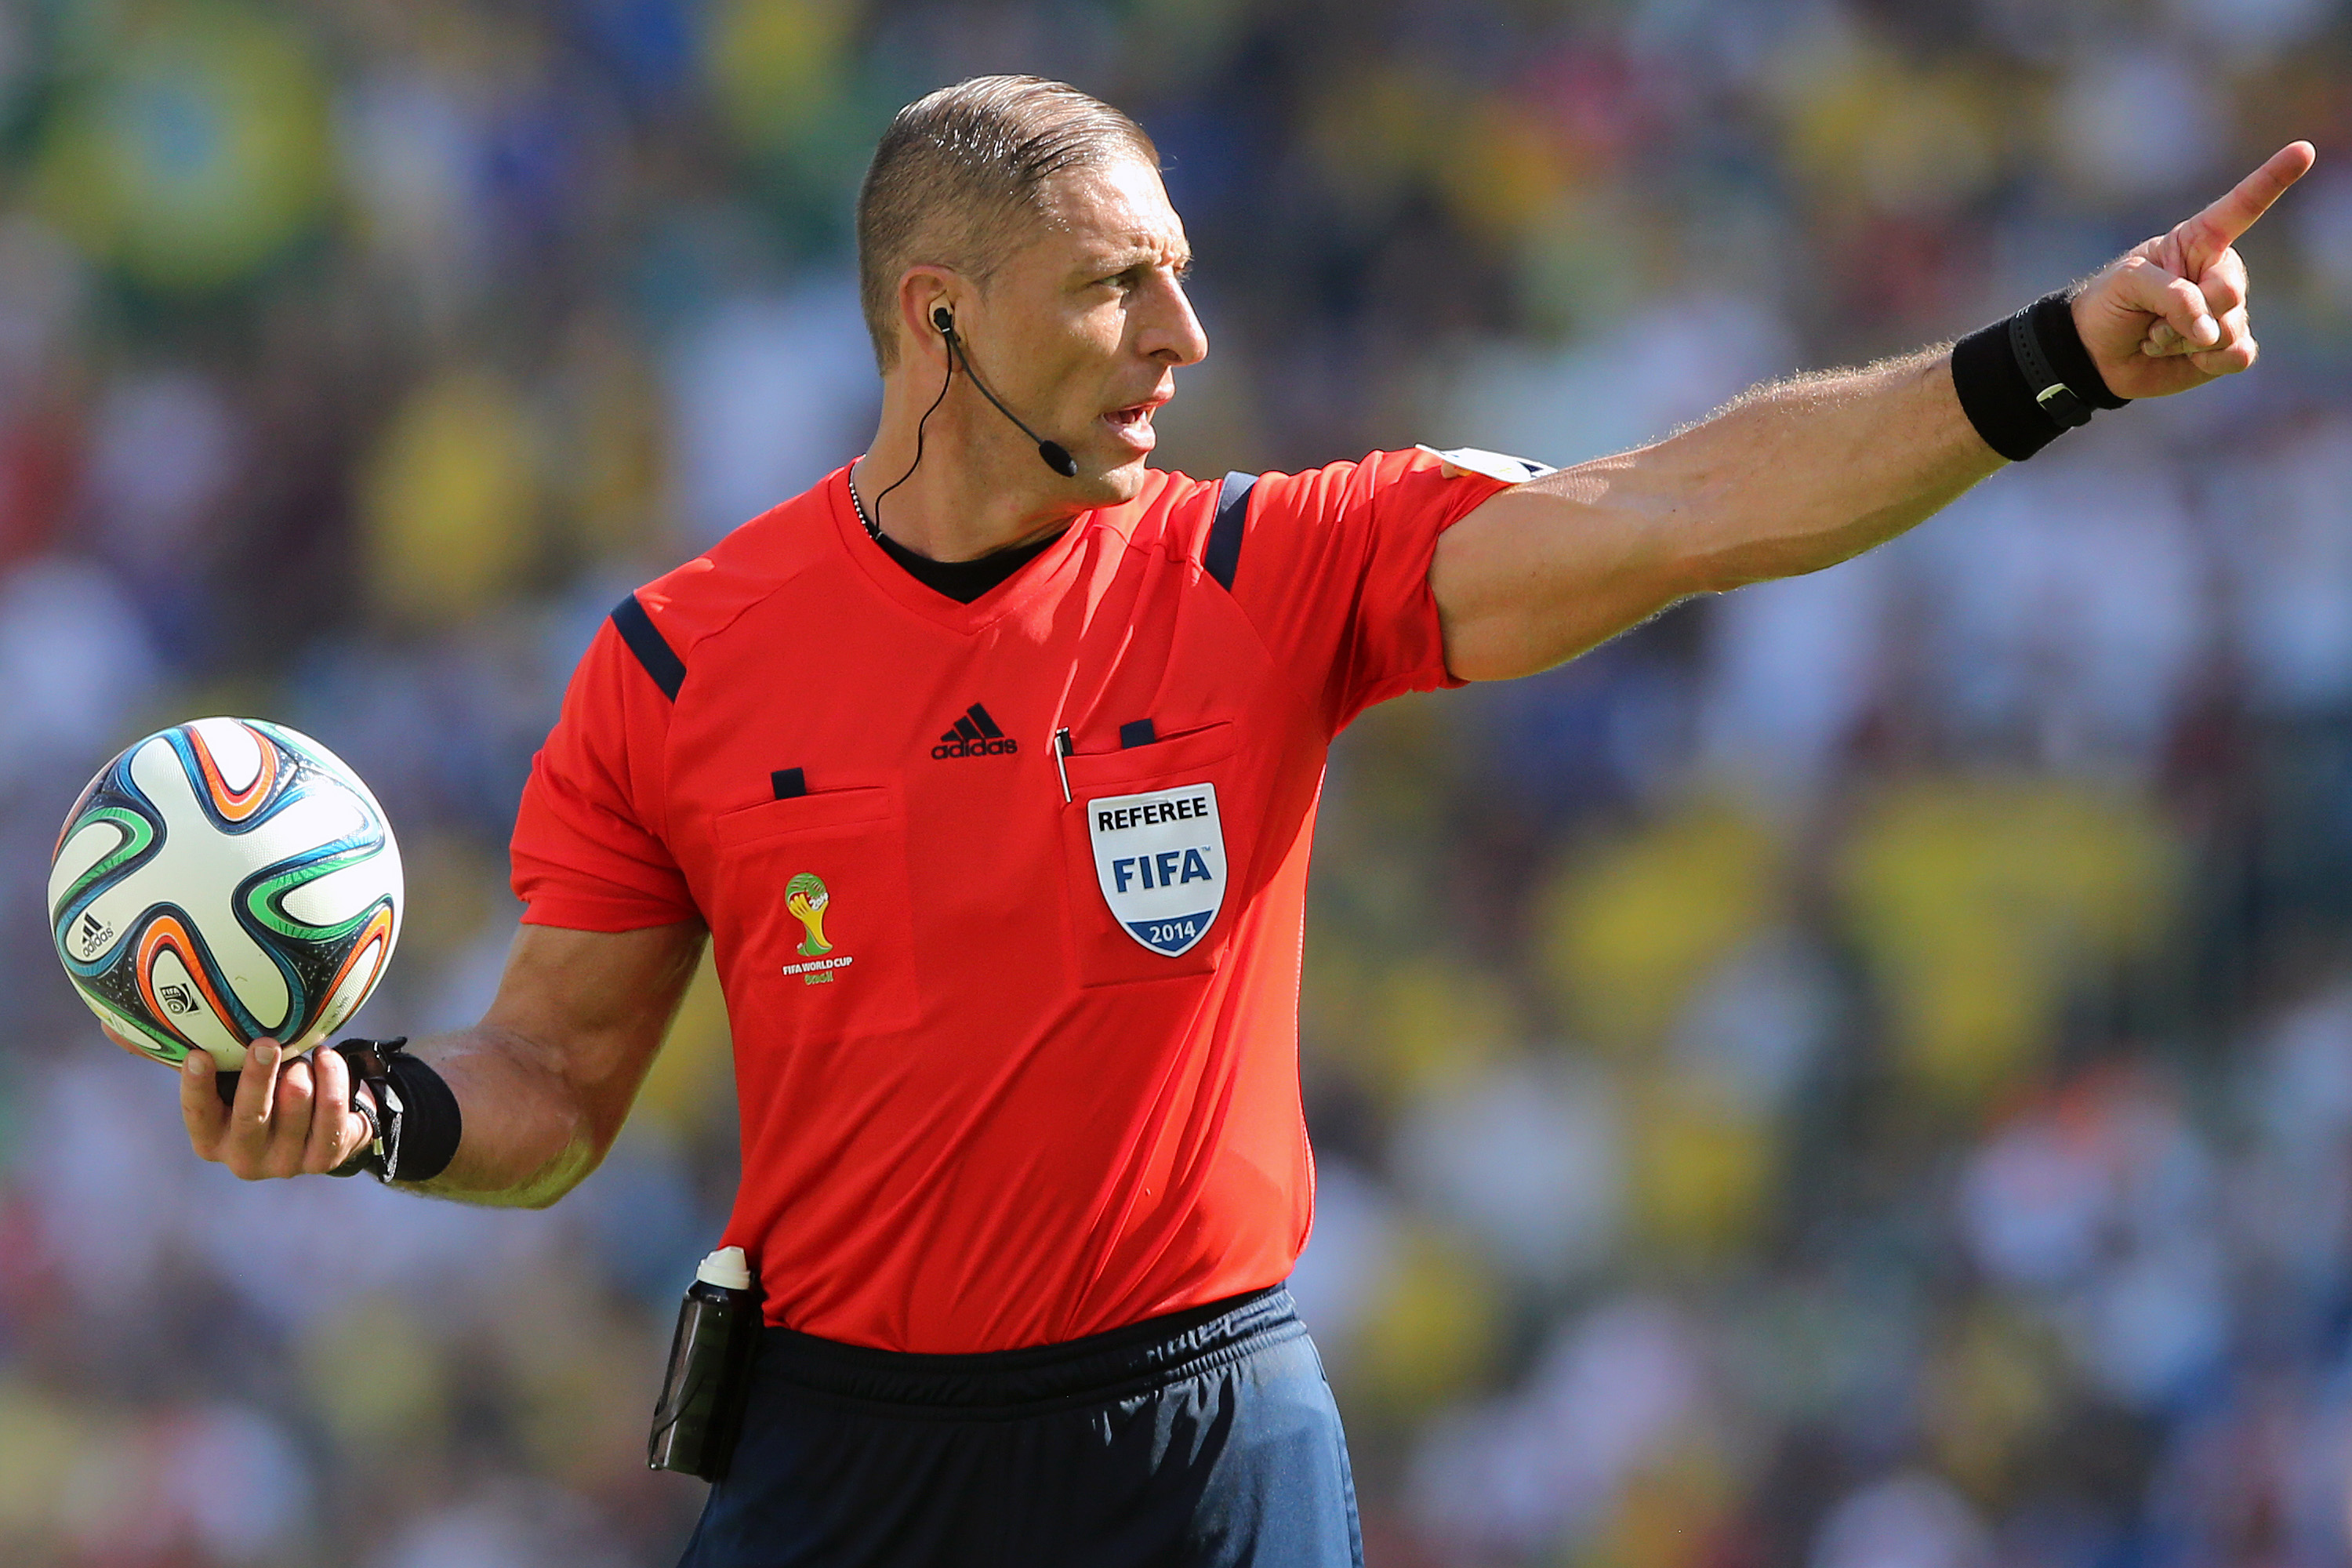 referee assignments for world cup